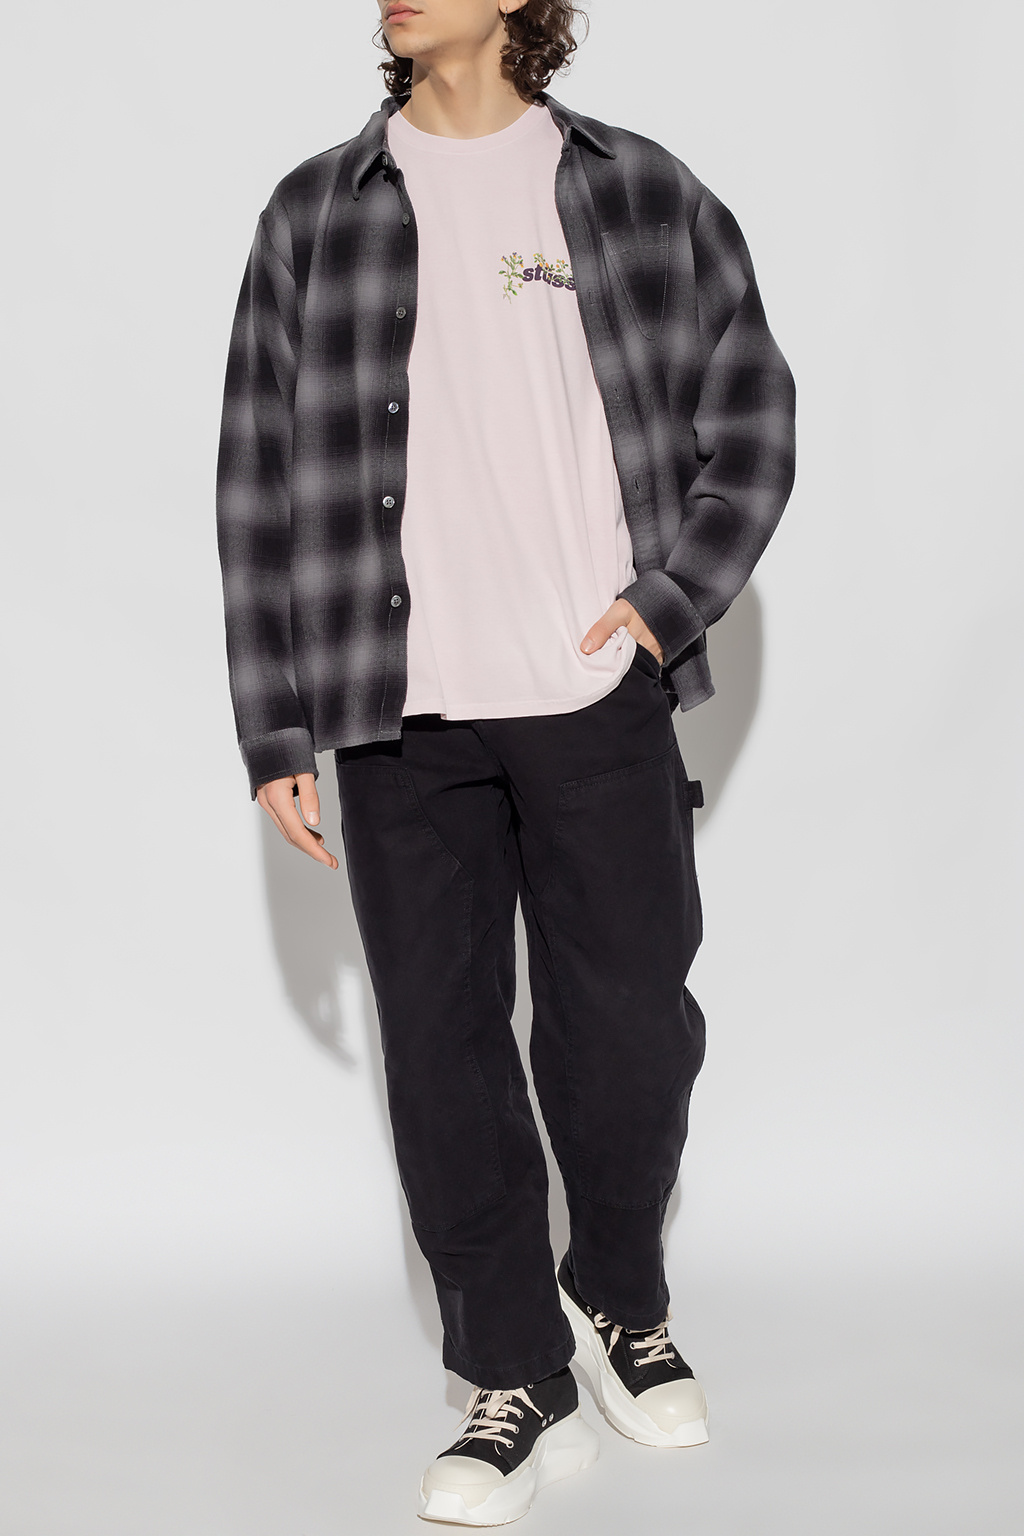 Pink Printed T - shirt Stussy - Burberry Jackets for Men